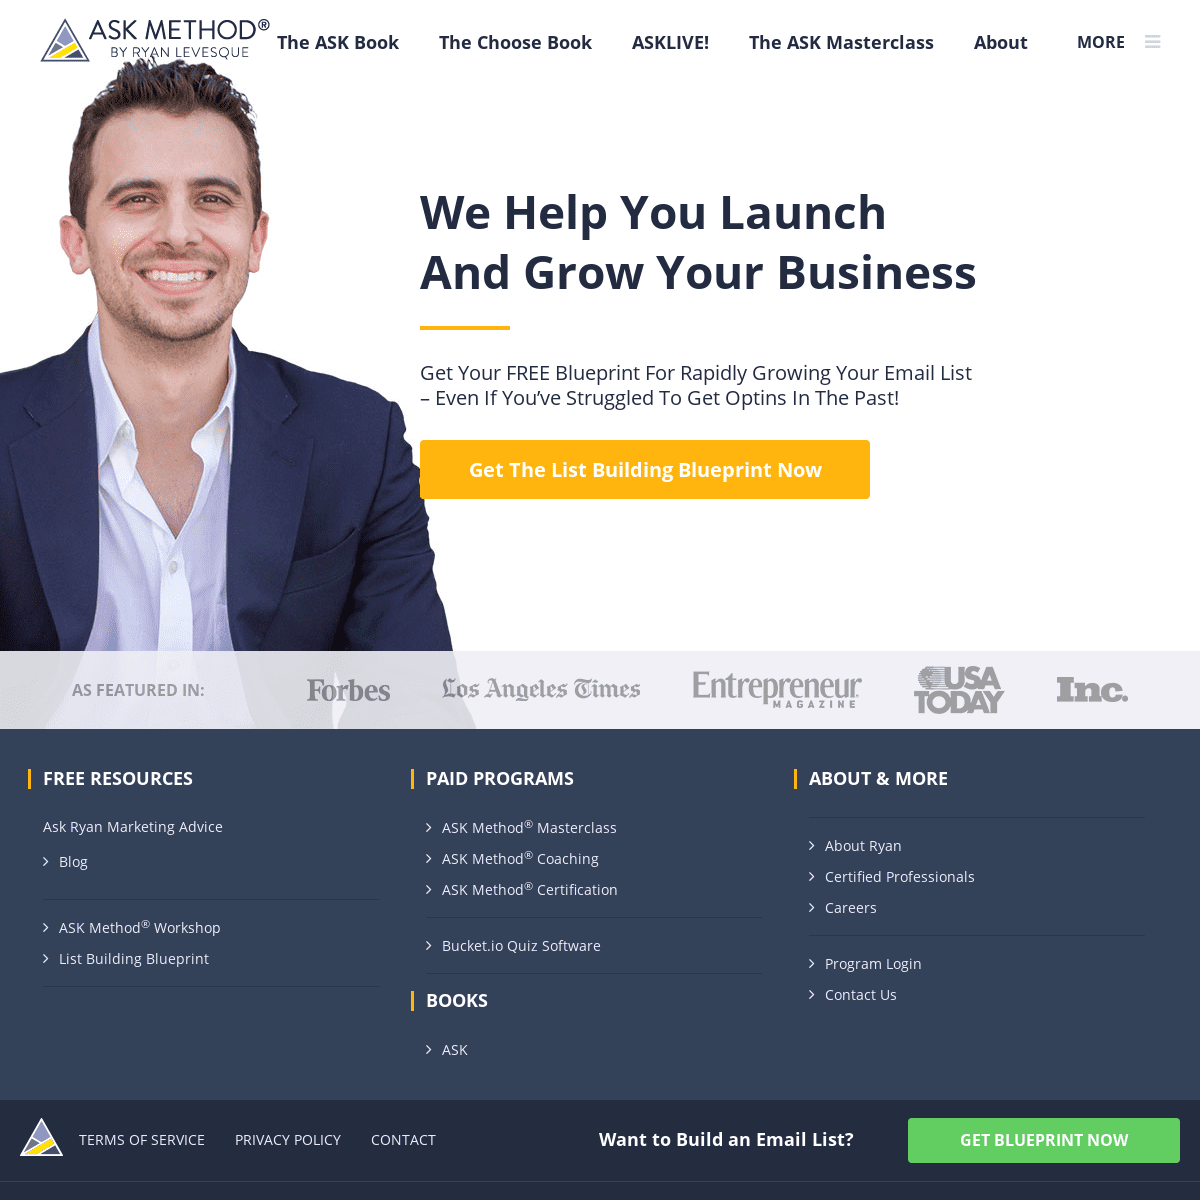 The ASK Method® by Ryan Levesque – We Help You Launch and Grow Your Business